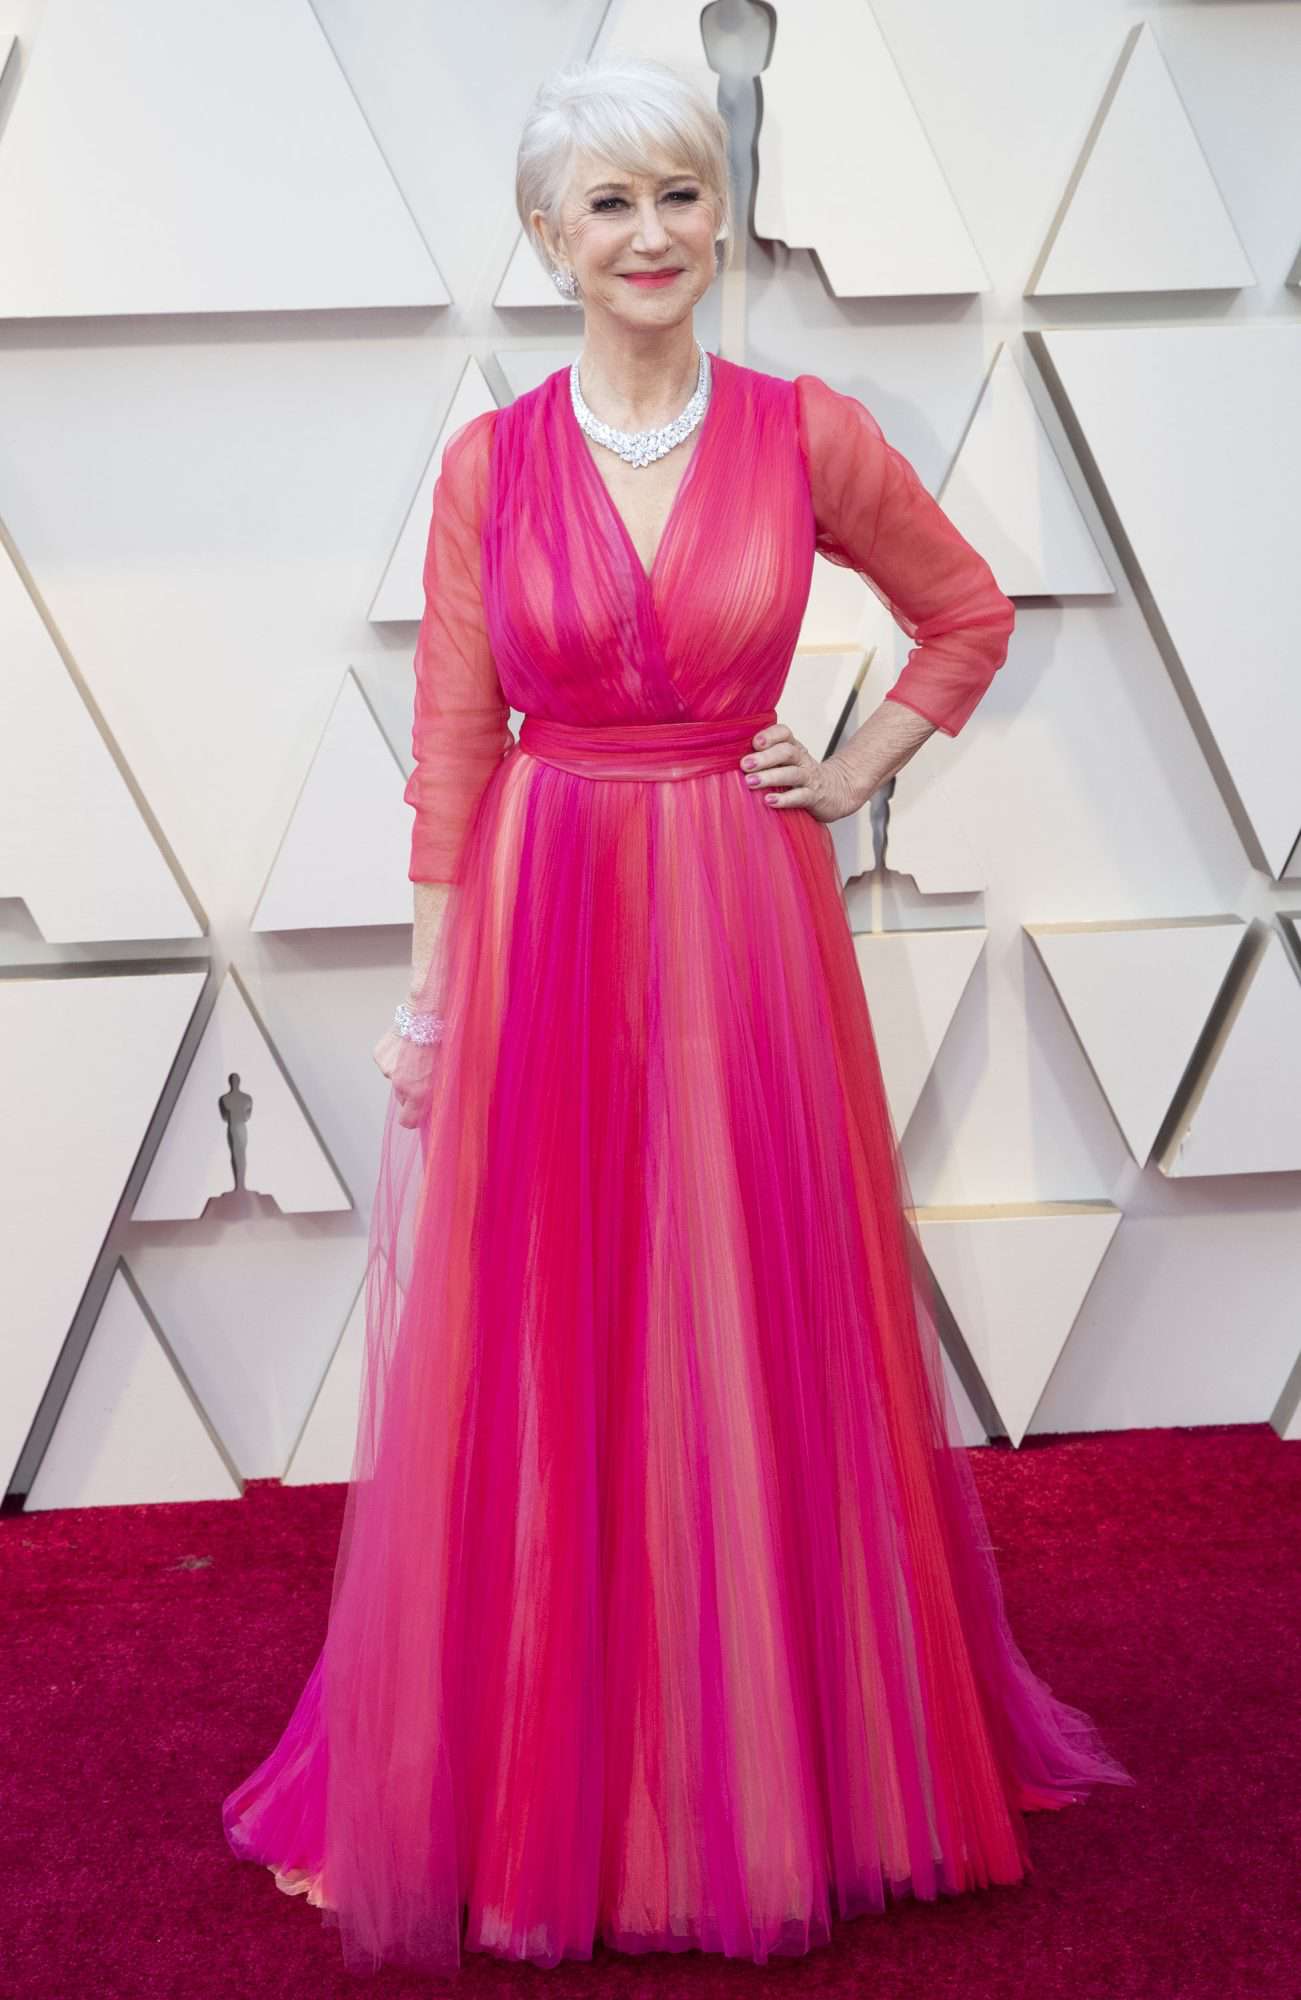 HELEN MIRREN ABC's Coverage Of The 91st Annual Academy Awards - Red Carpet